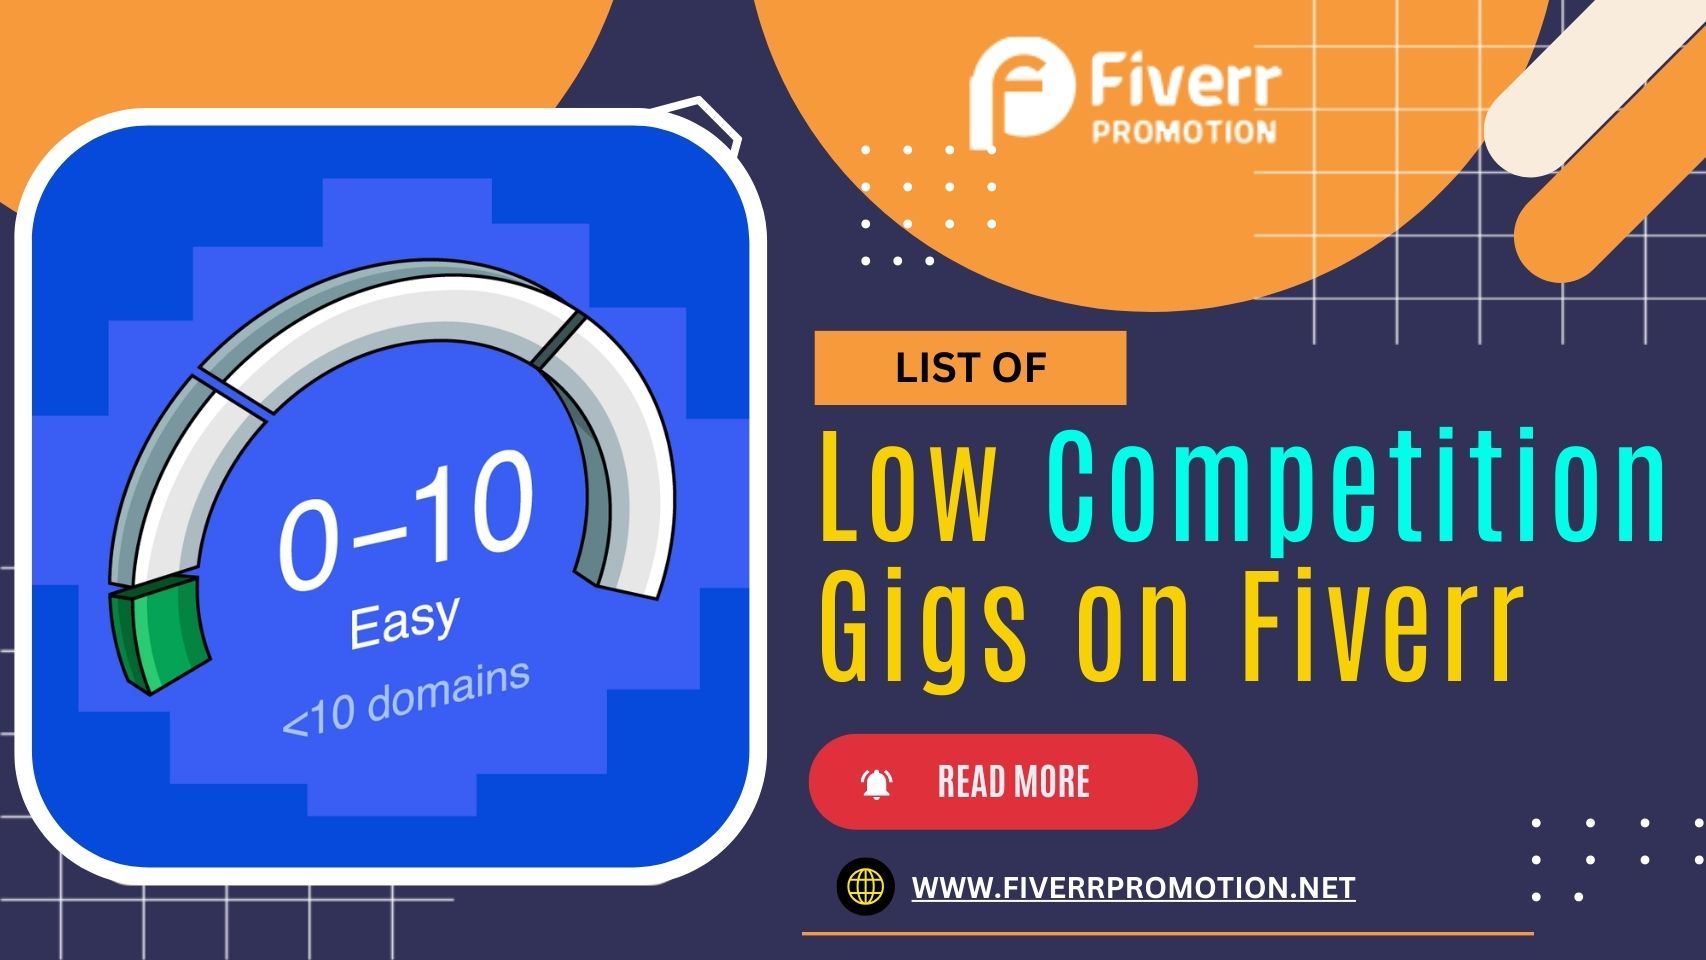 List of Low Competition Gigs on Fiverr